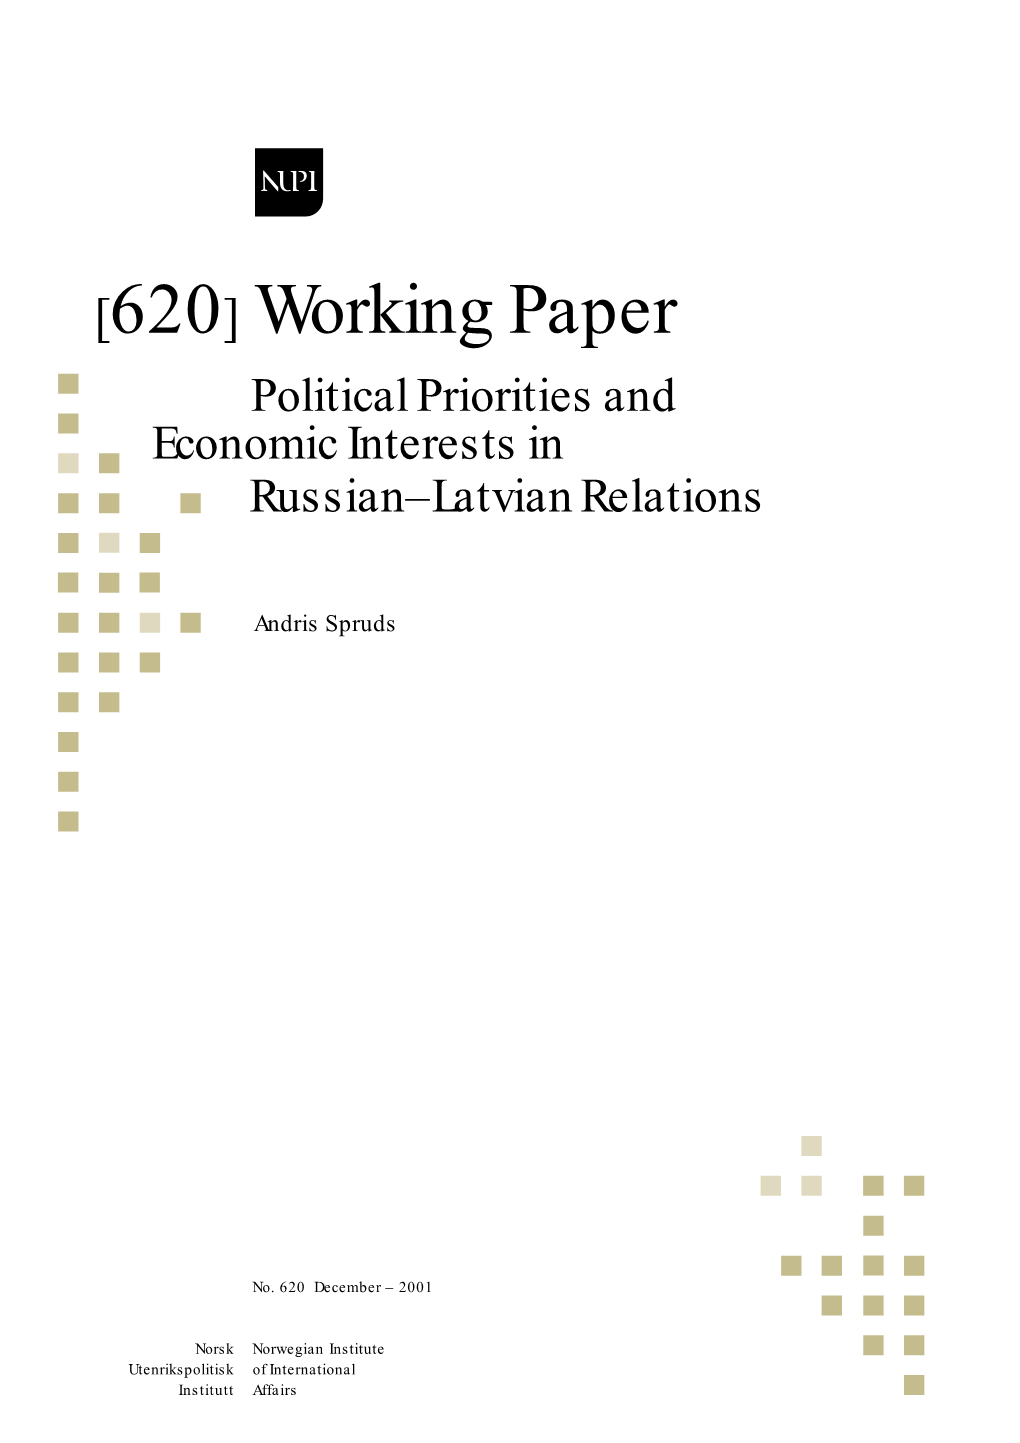 Political Priorities and Economic Interests in Russian-Latvian Relations